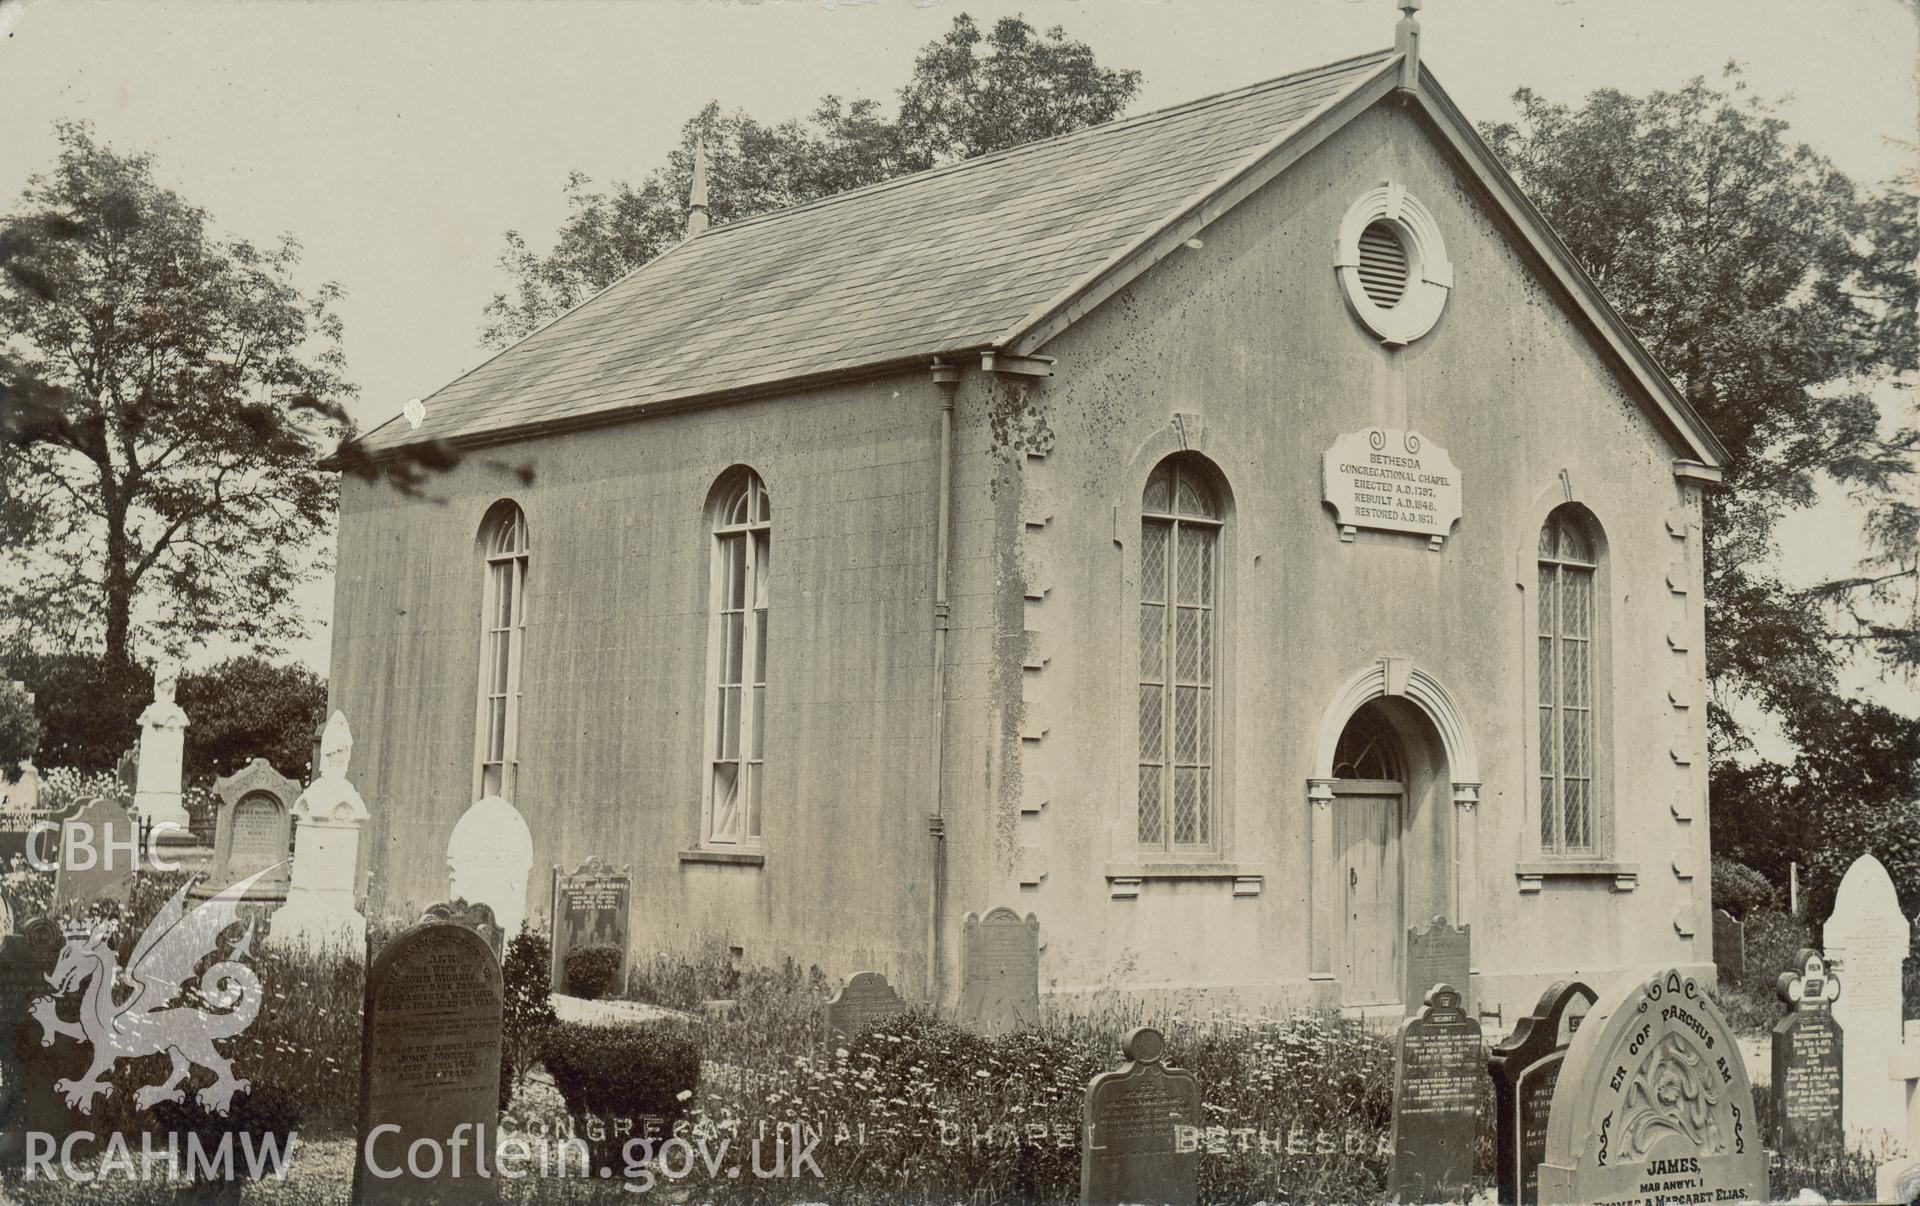 Digital copy of monochrome postcard showing exterior view of Bethesda Welsh Independent (or Congregational) chapel, Llawhaden. Loaned for copying by Thomas Lloyd.